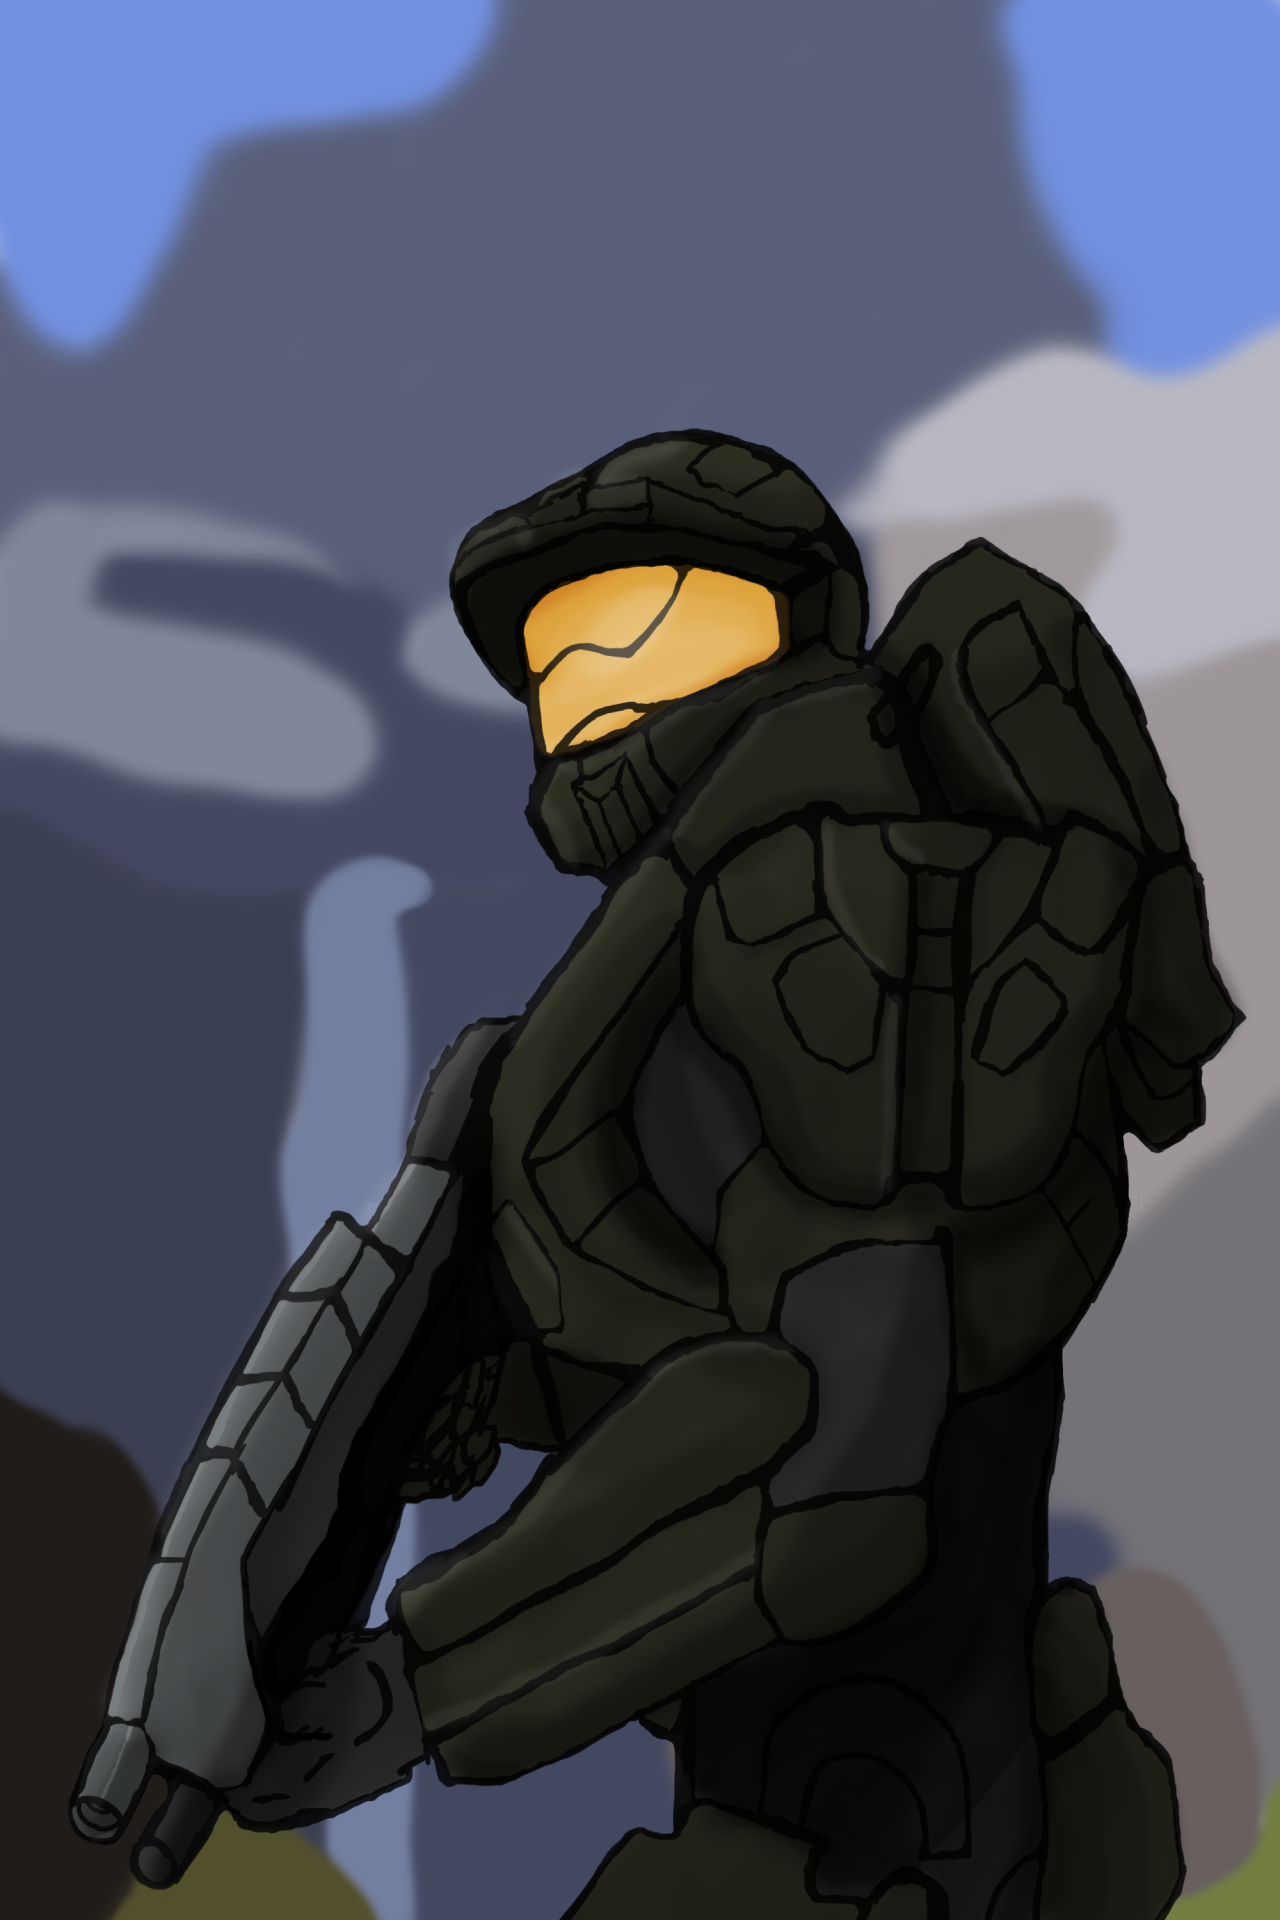 Just finished this today. Here is my Master Chief Painting MidTerm project for one